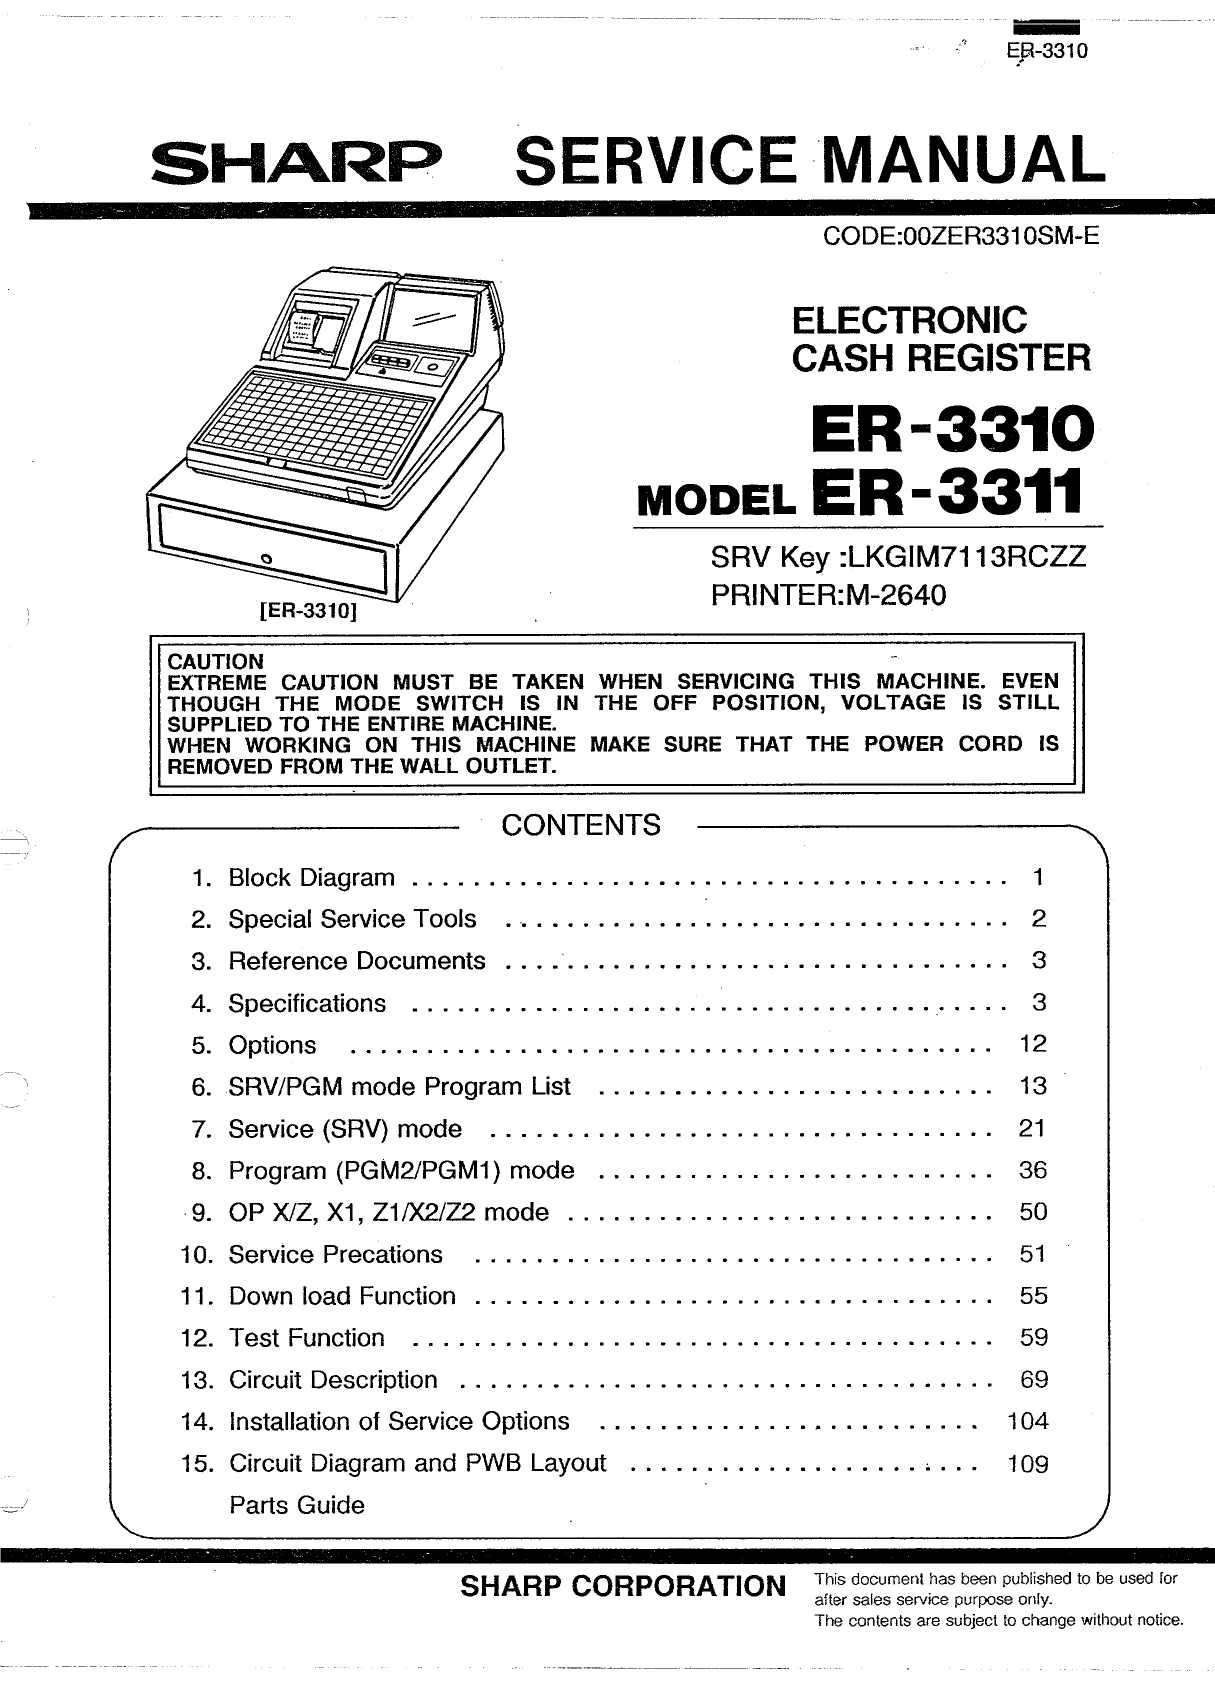 Er3310 3311 Service Manual Great Lakes Business Equipment Manualzz